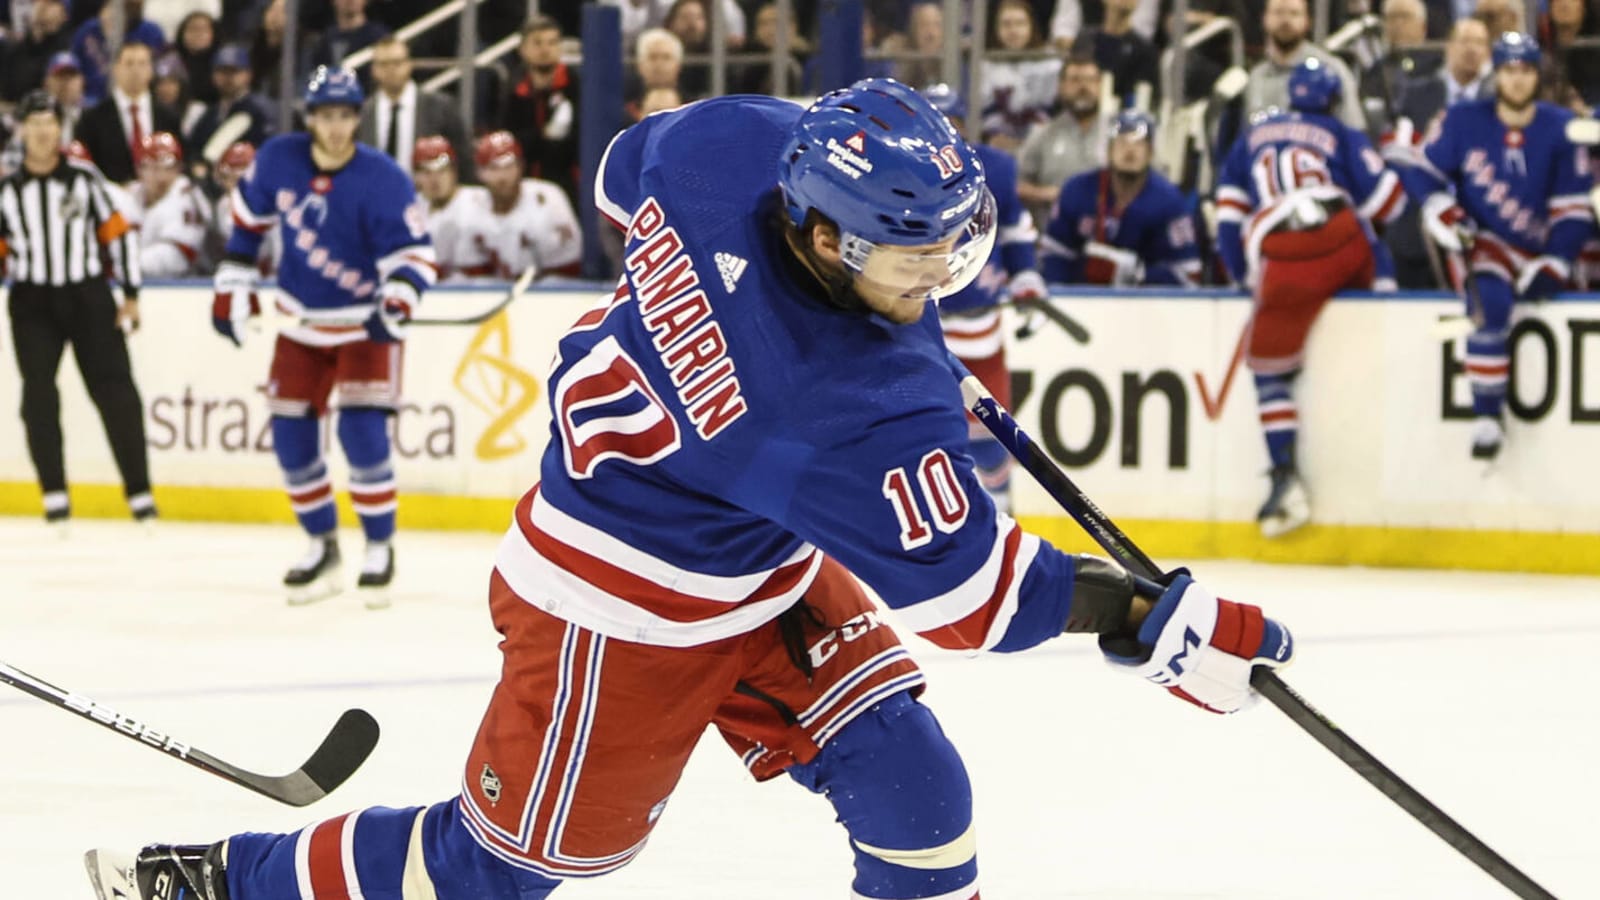 Rangers’ Playoff Run Will Be Short if Panarin Doesn’t Improve Play